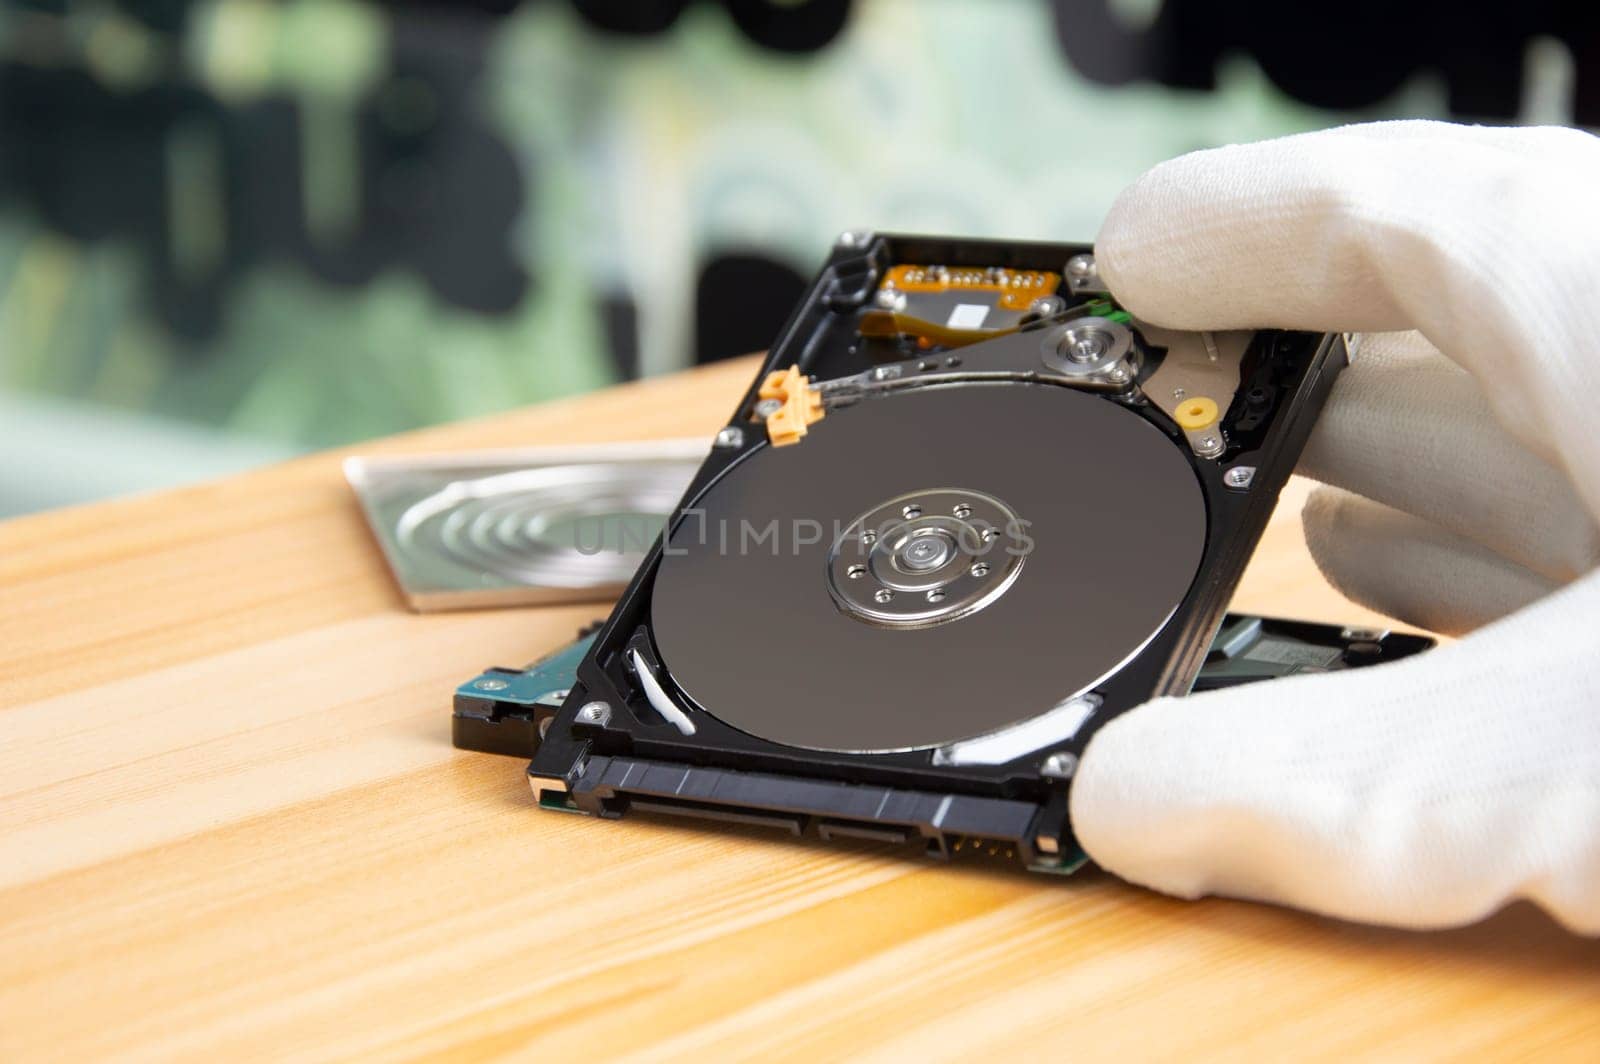 2.5-inch hard disk drive is the part that is used to store data or is called a hard disk as well.